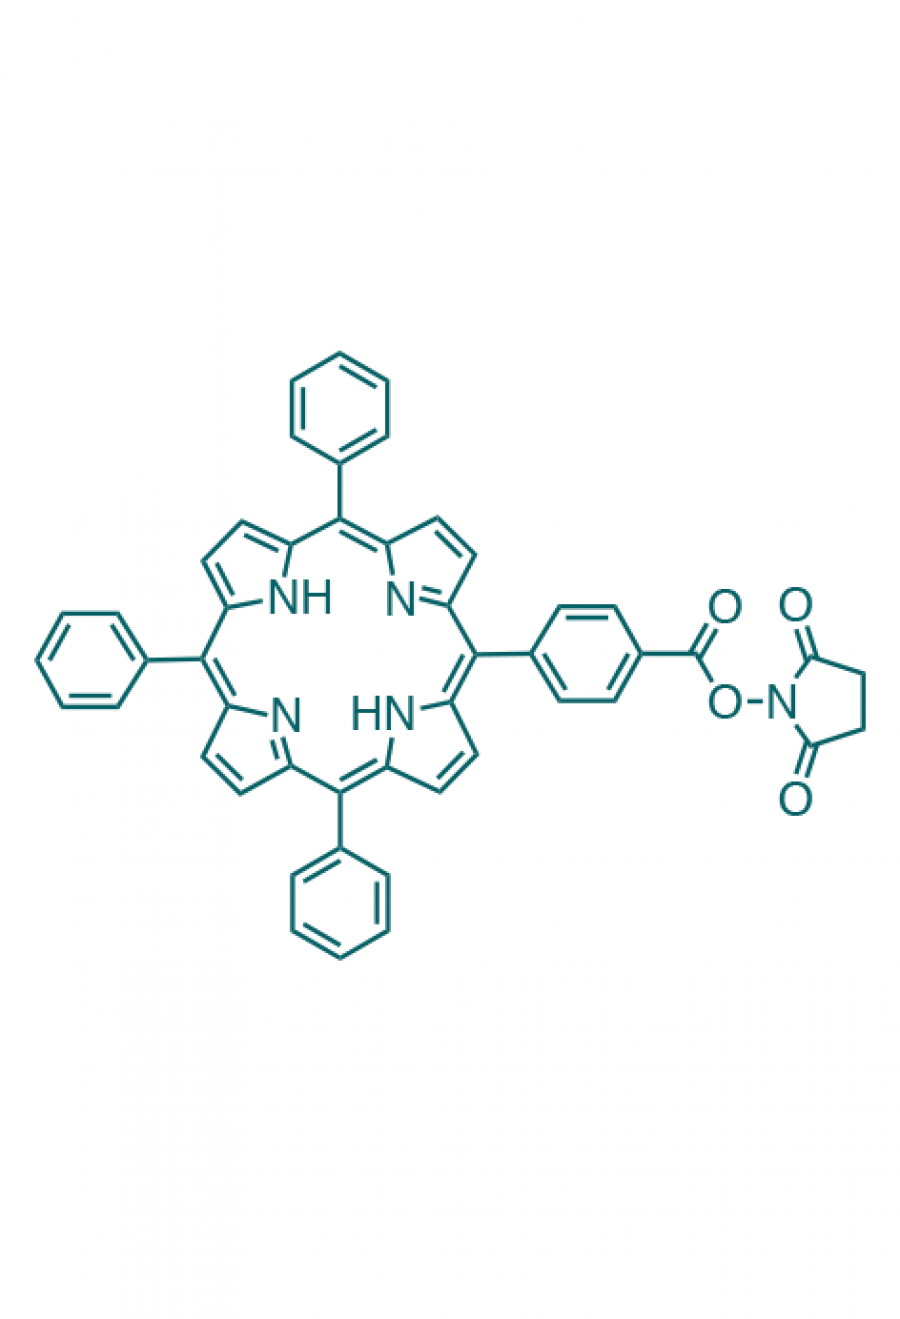 5-(4-carboxyphenyl succinimide ester)-10,15,20-(triphenyl)porphyrin  | Porphychem Expert porphyrin synthesis for research & industry